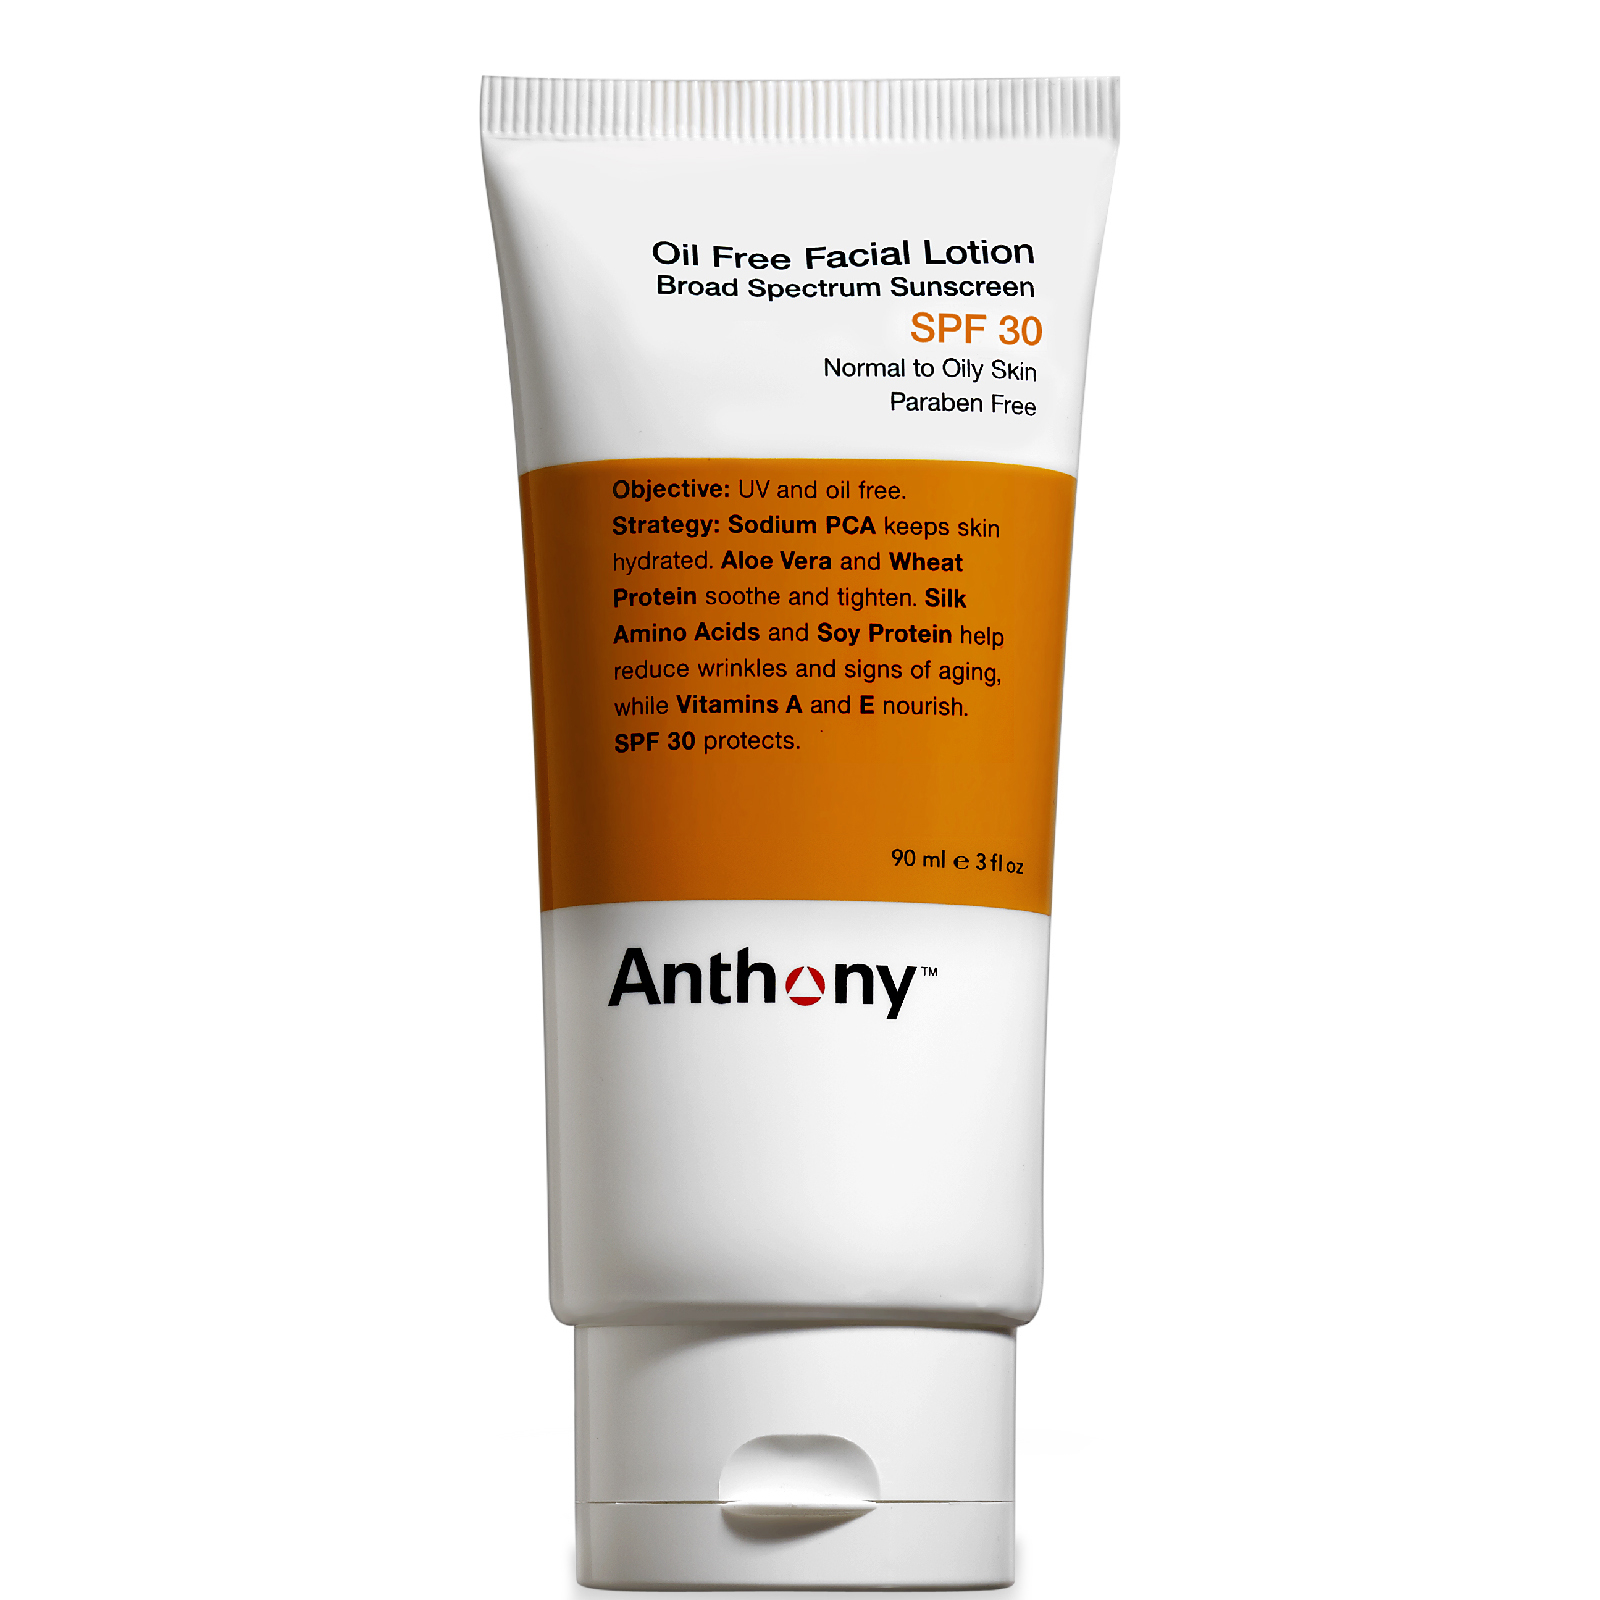 Anthony Oil Free Facial Lotion SPF 30